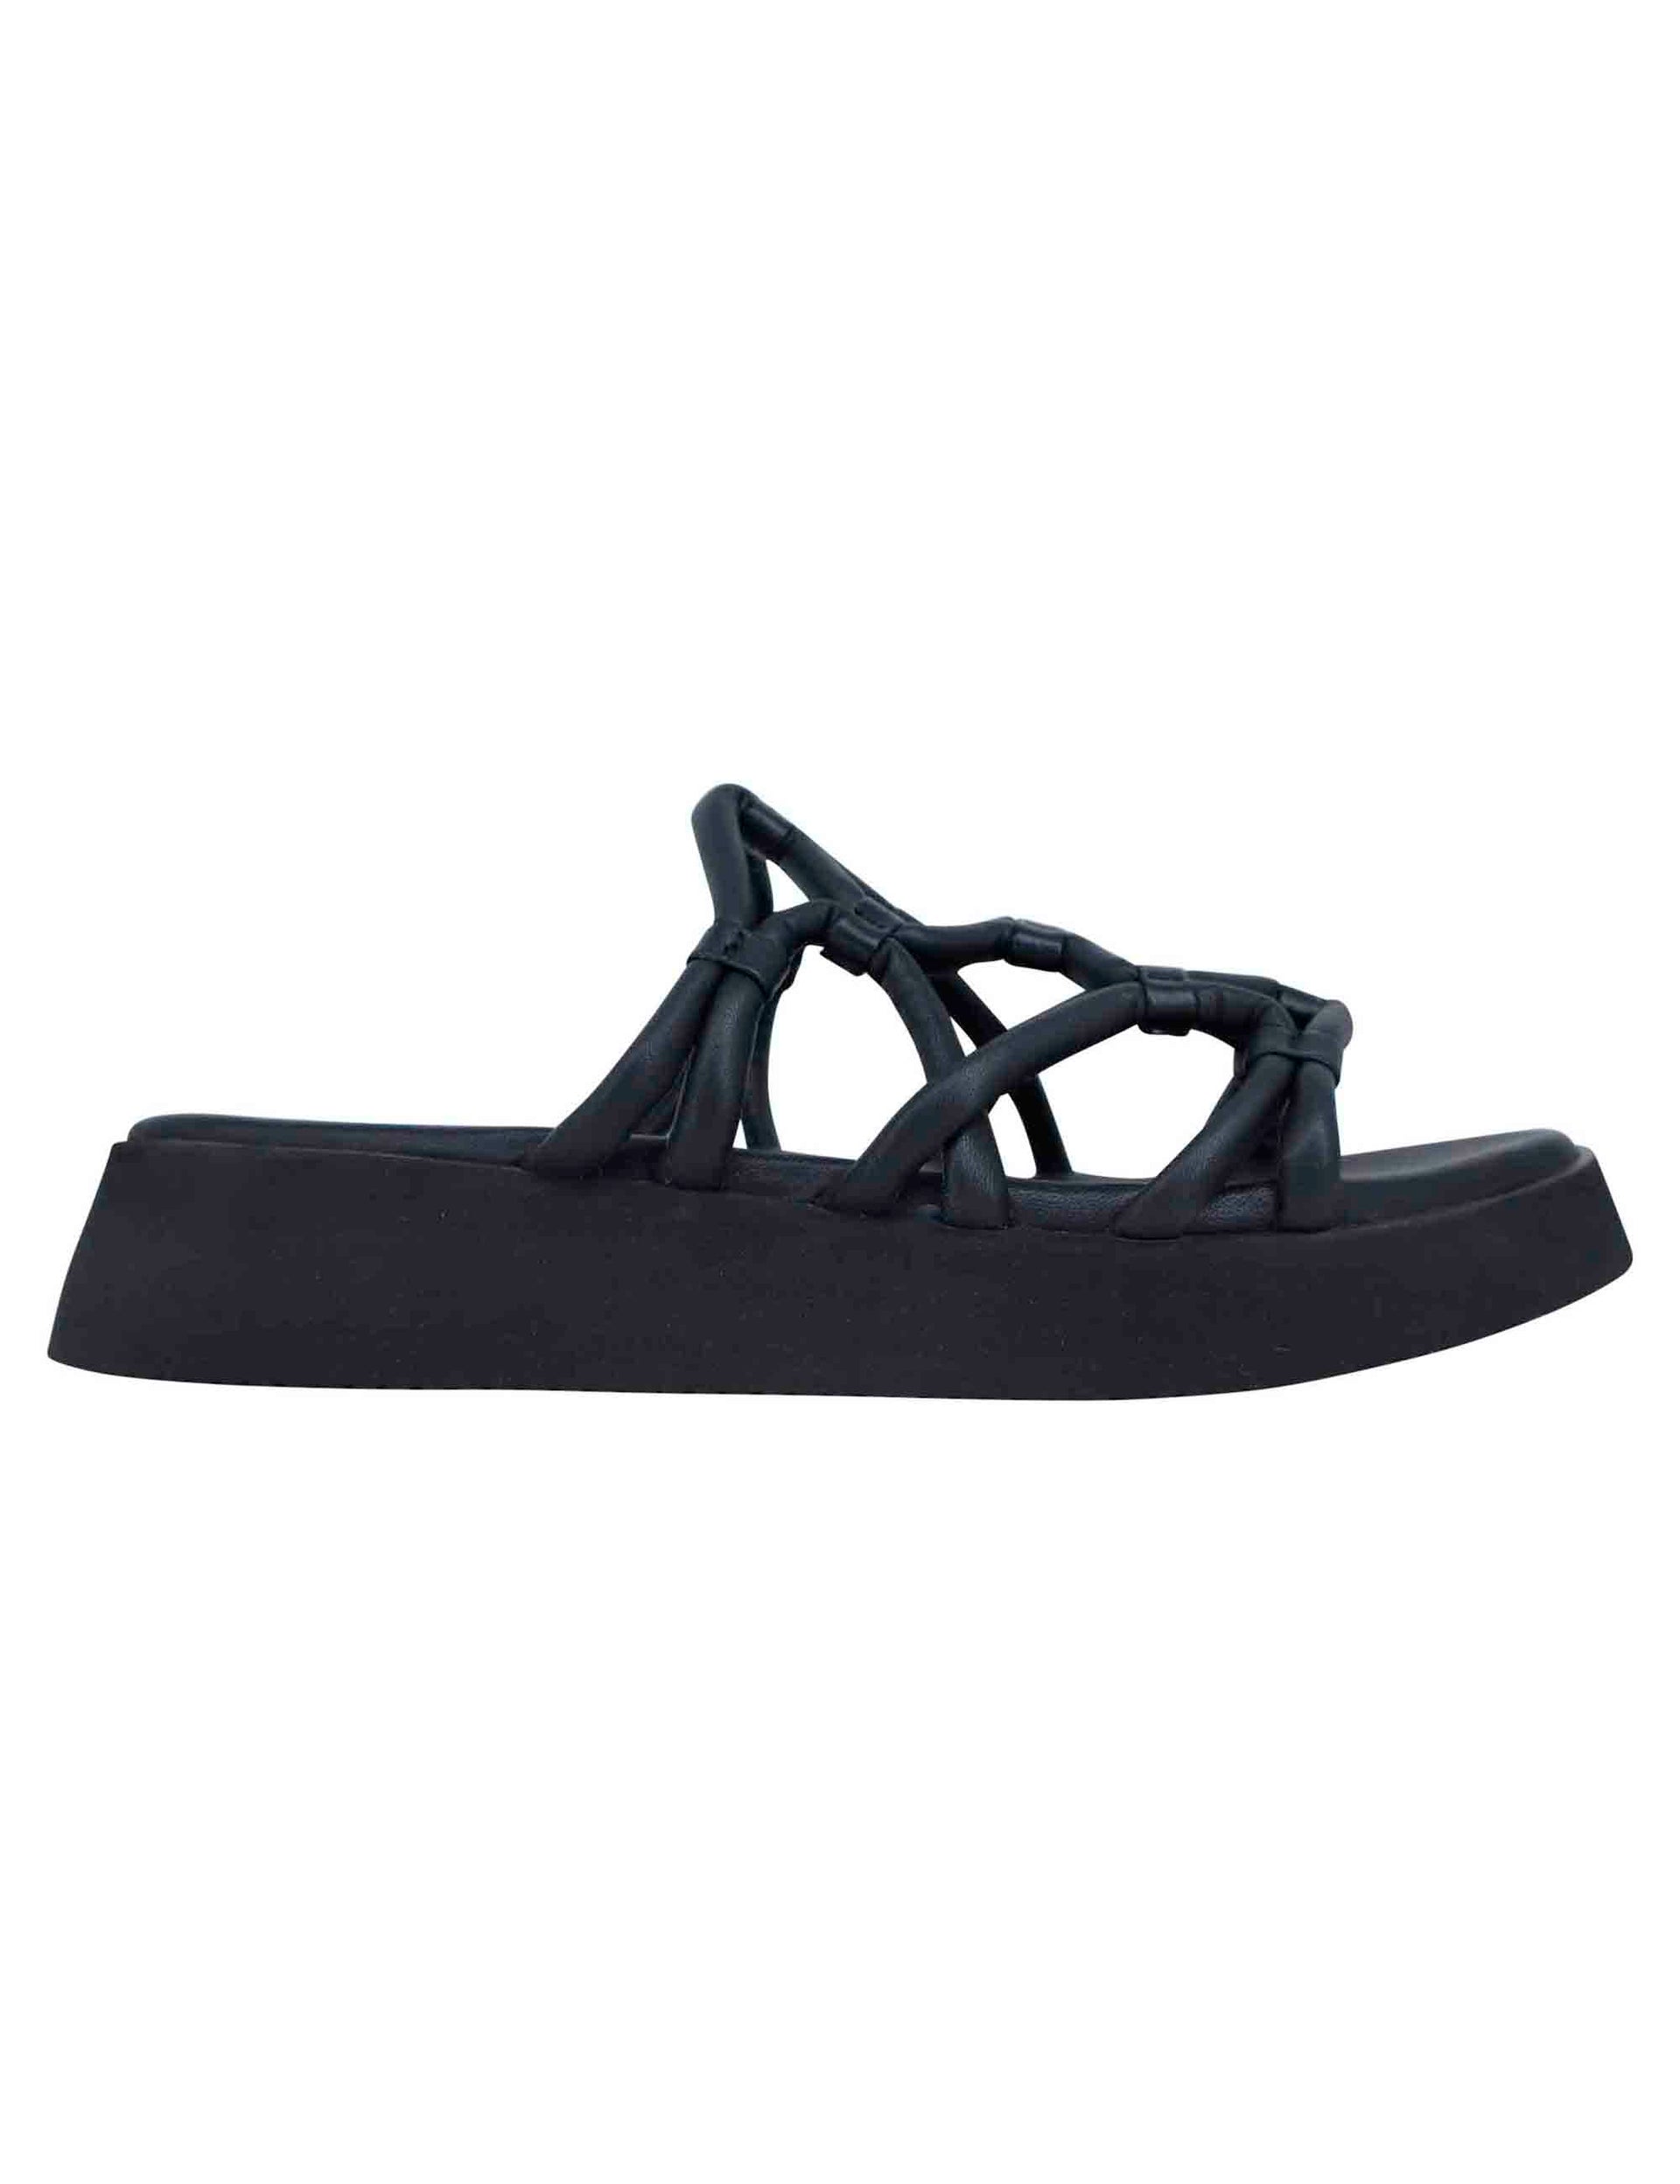 Women's black leather sandals with rubber wedge